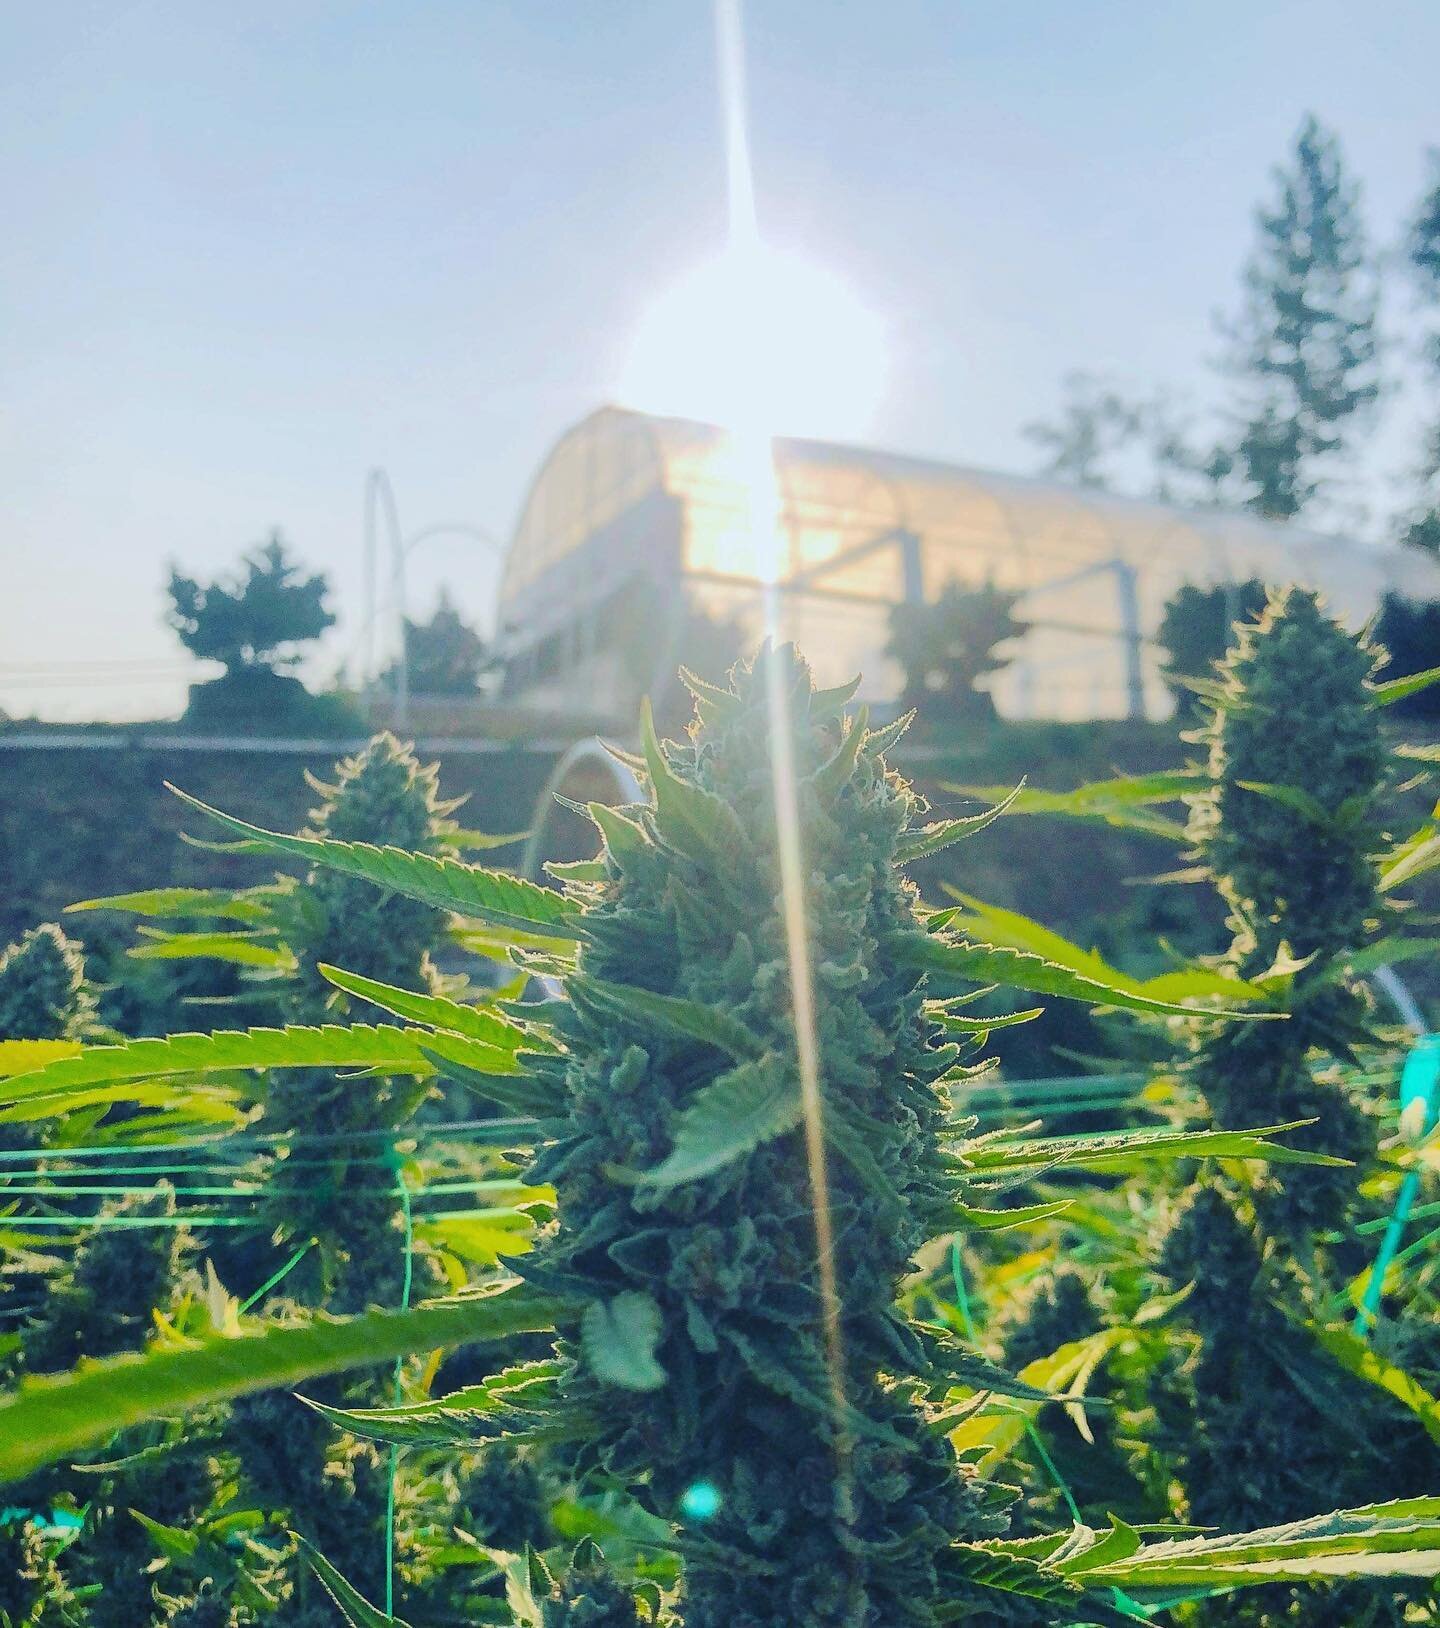 A beautiful morning at the farm! Finally starting to get that nice cool, crisp fall air outside. Ready to start seeing the #colorsofcannabis come out on our ladies. Pictured is our full term #slurricane bred by @inhousegenetics_official. She&rsquo;ll